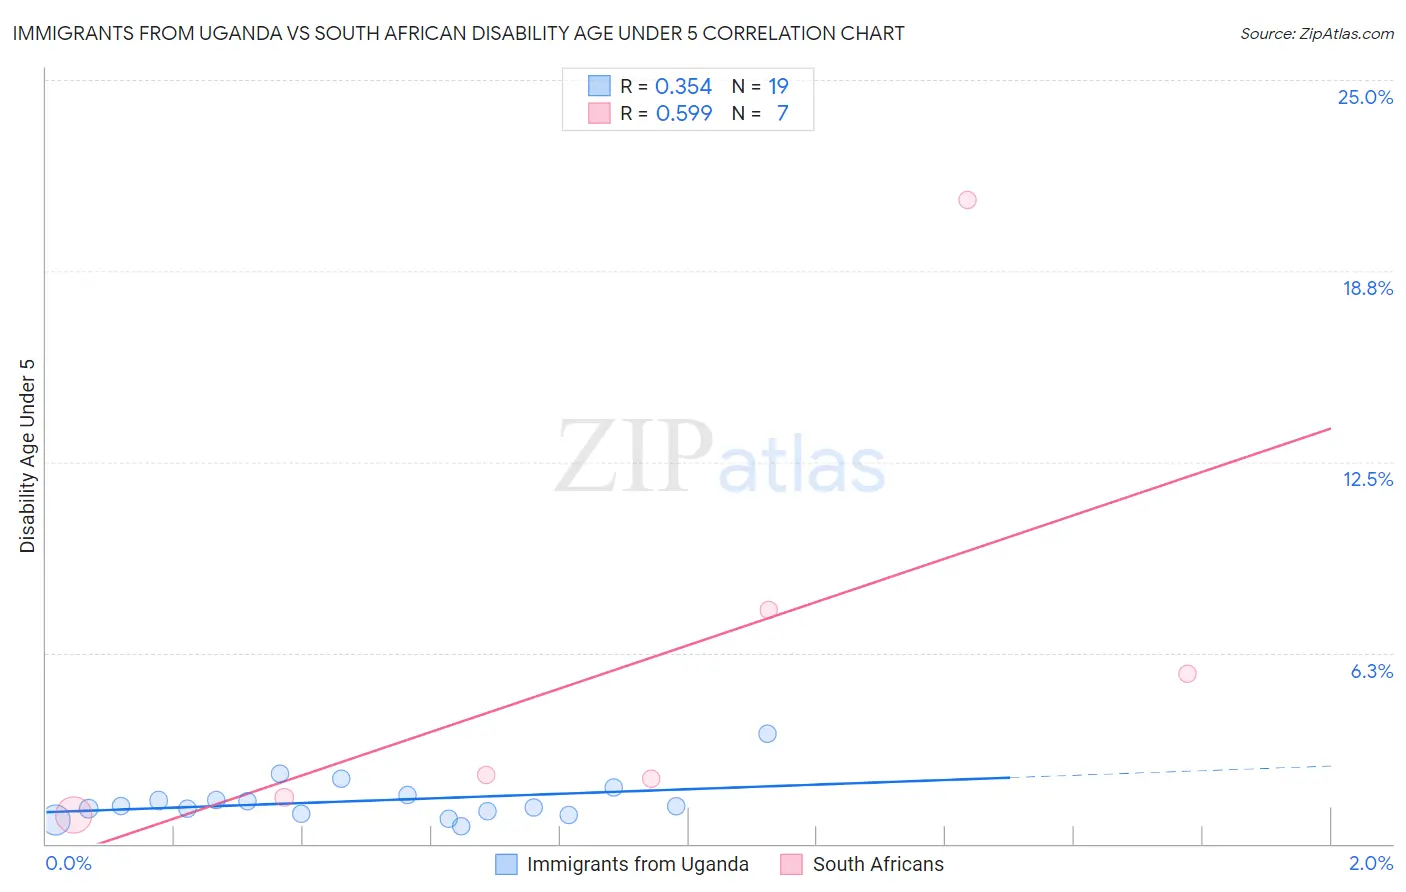 Immigrants from Uganda vs South African Disability Age Under 5